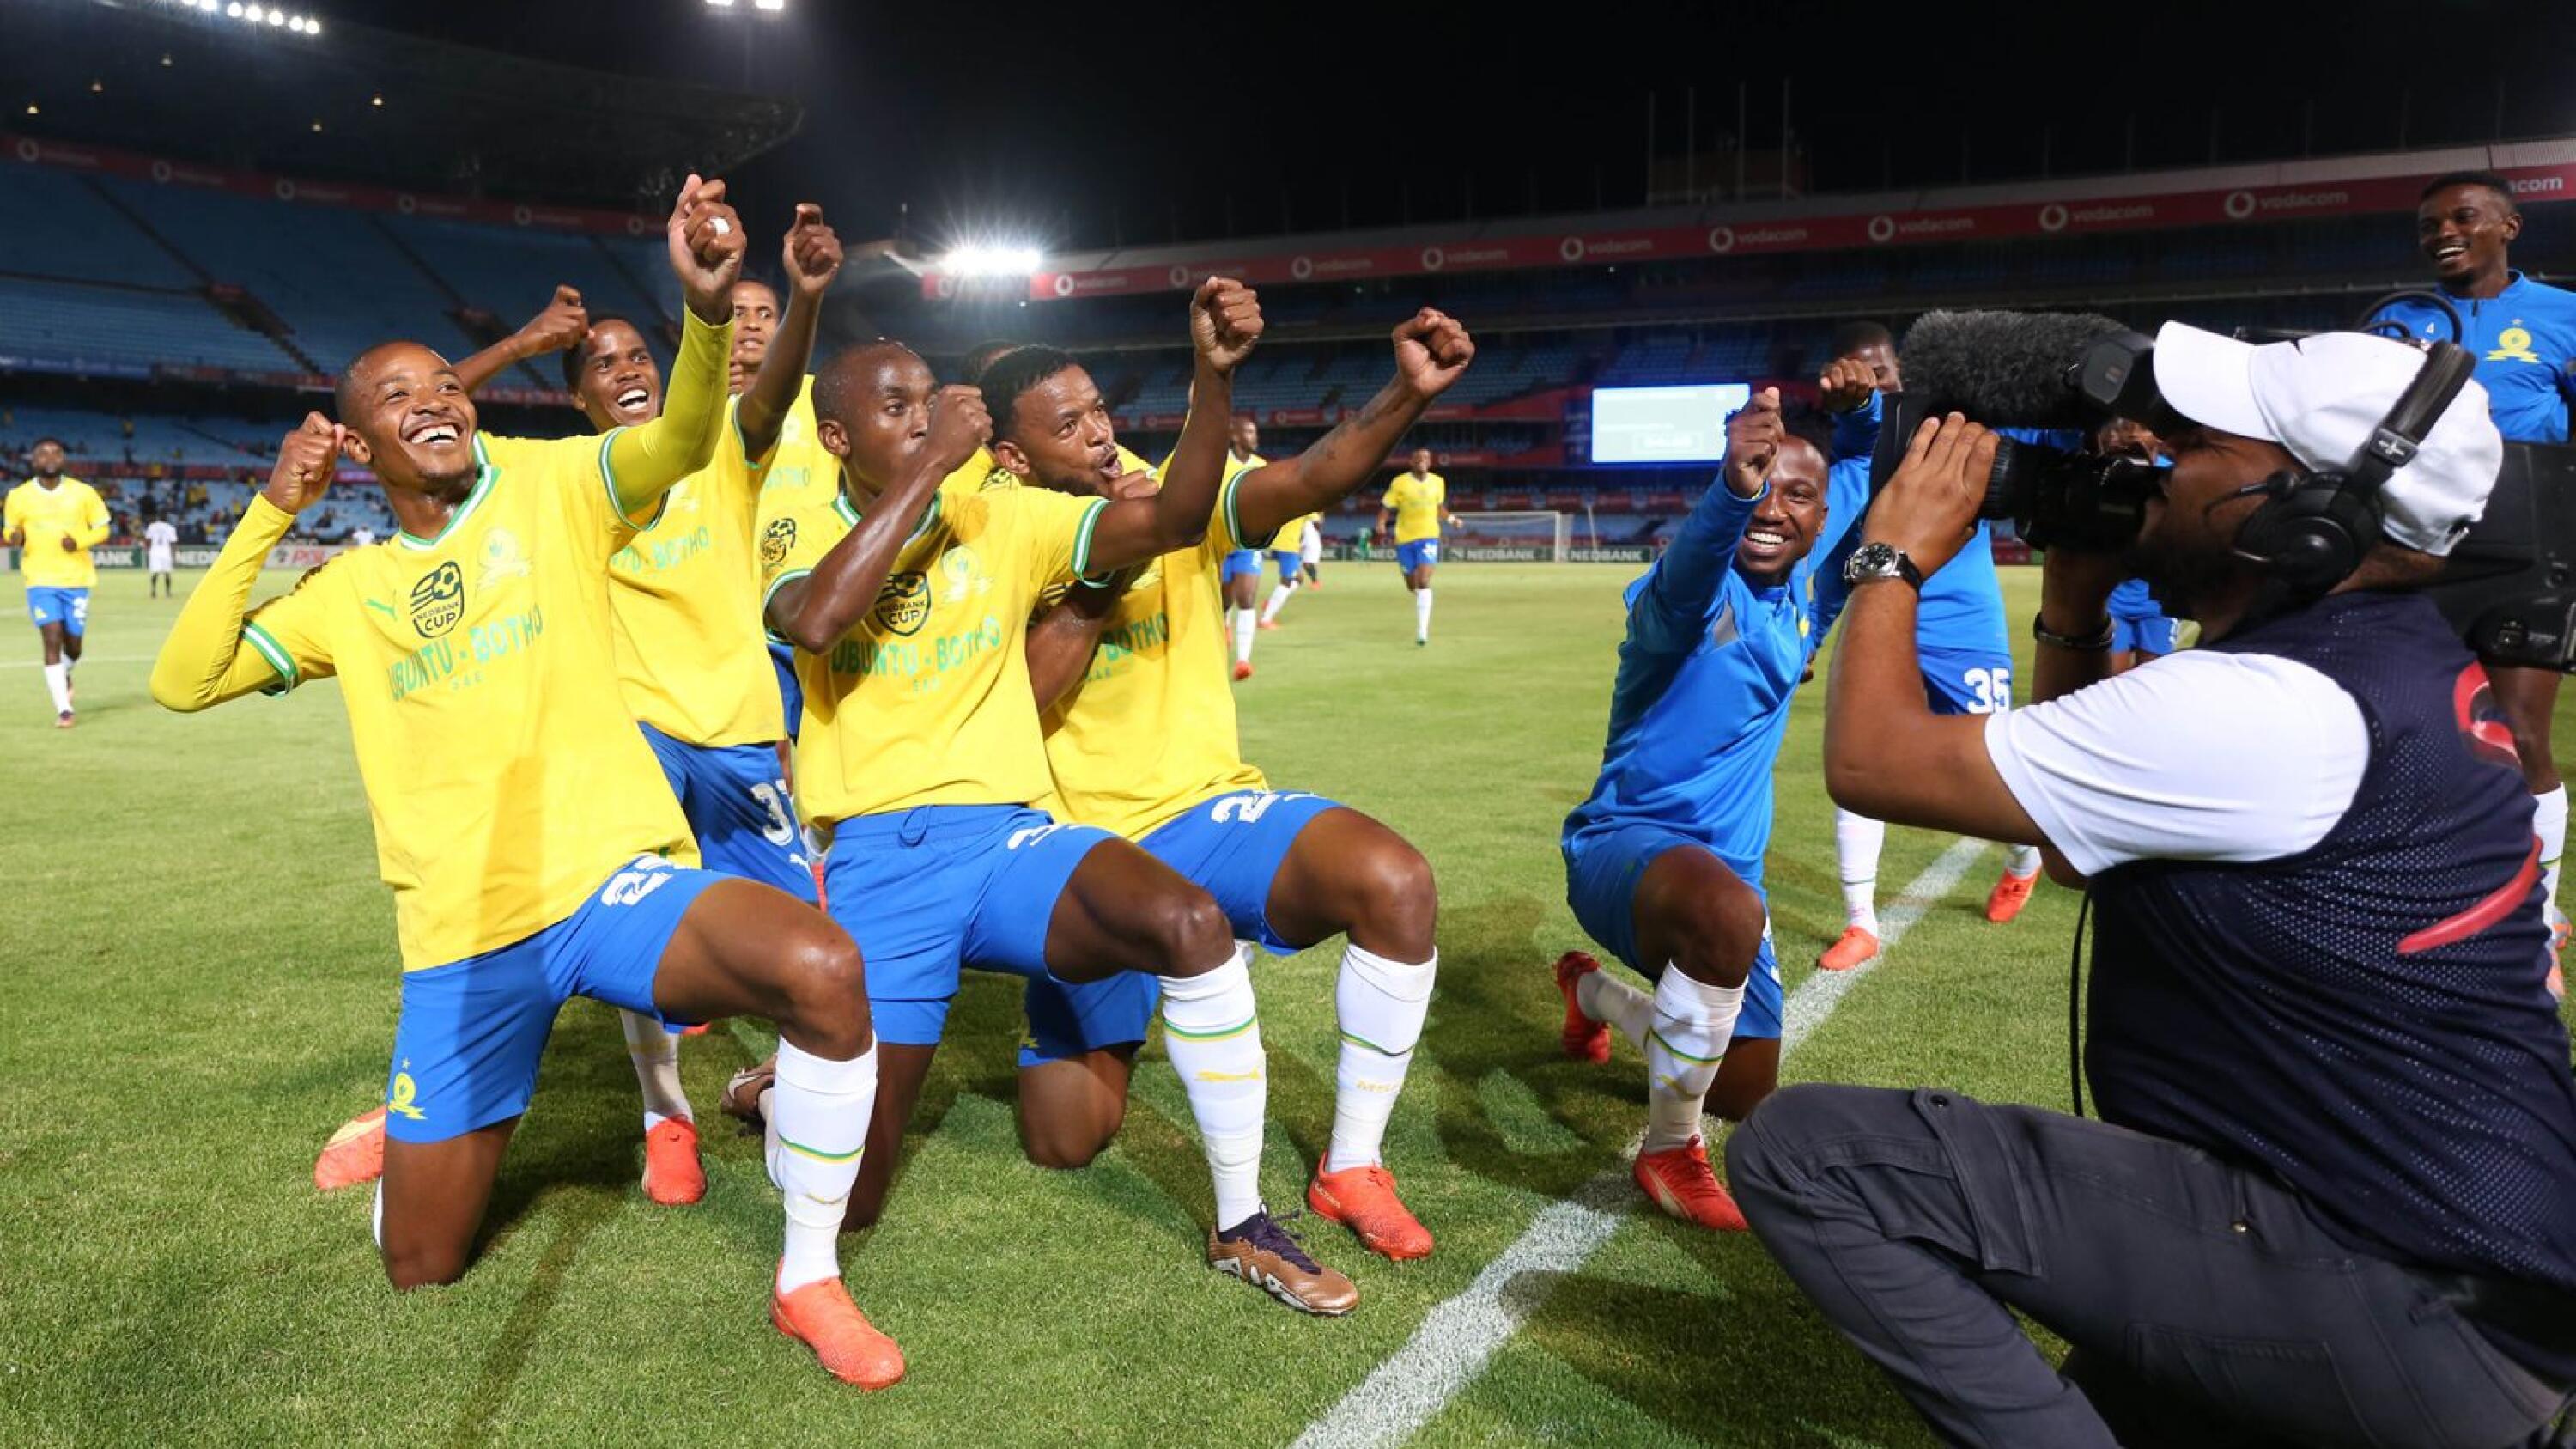 Mamelodi Sundowns players celebrate one of their goals during their Nedbank Cup match against Richards Bay at Loftus Versfeld in Tshwane on Tuesday night